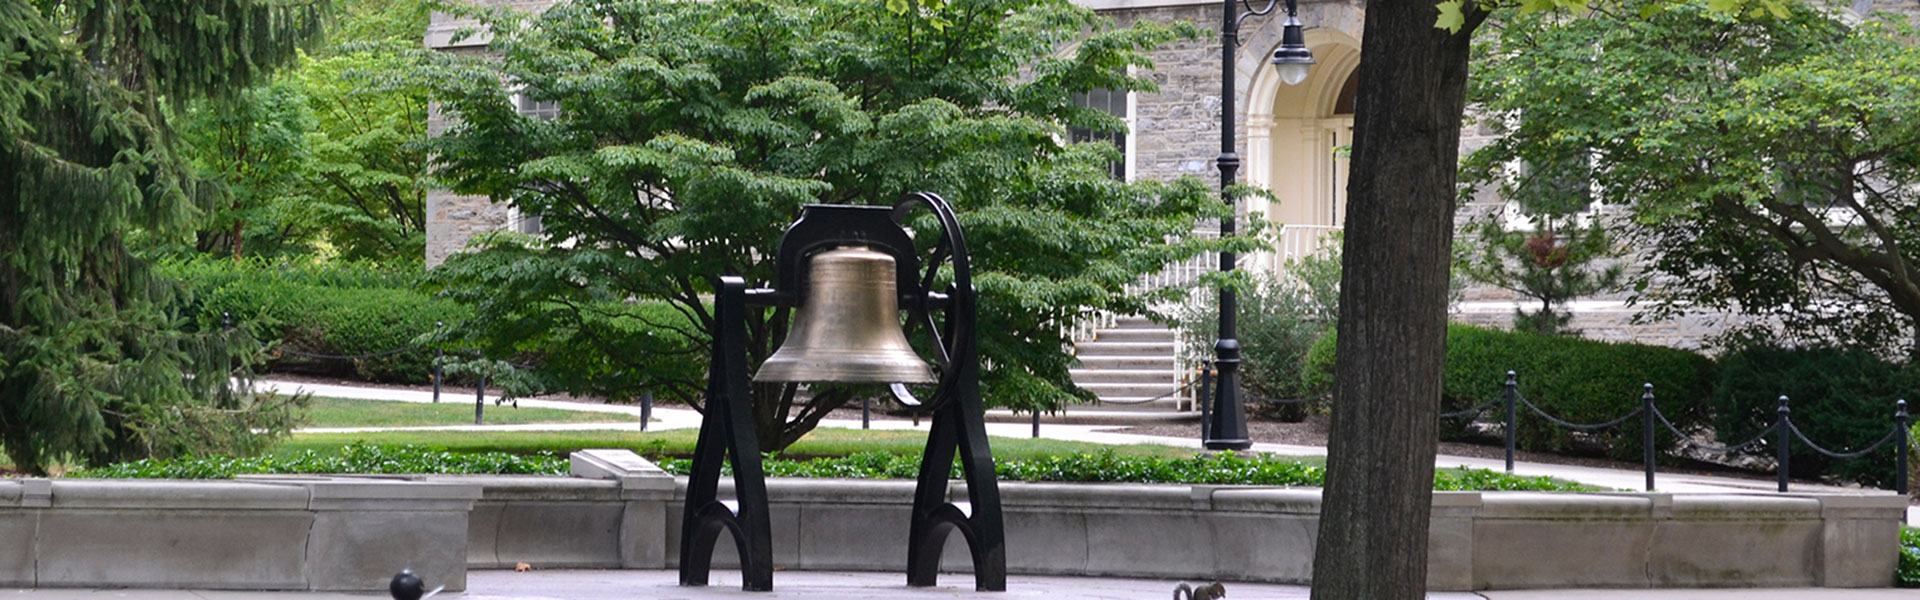 Old Main Bell at Penn State